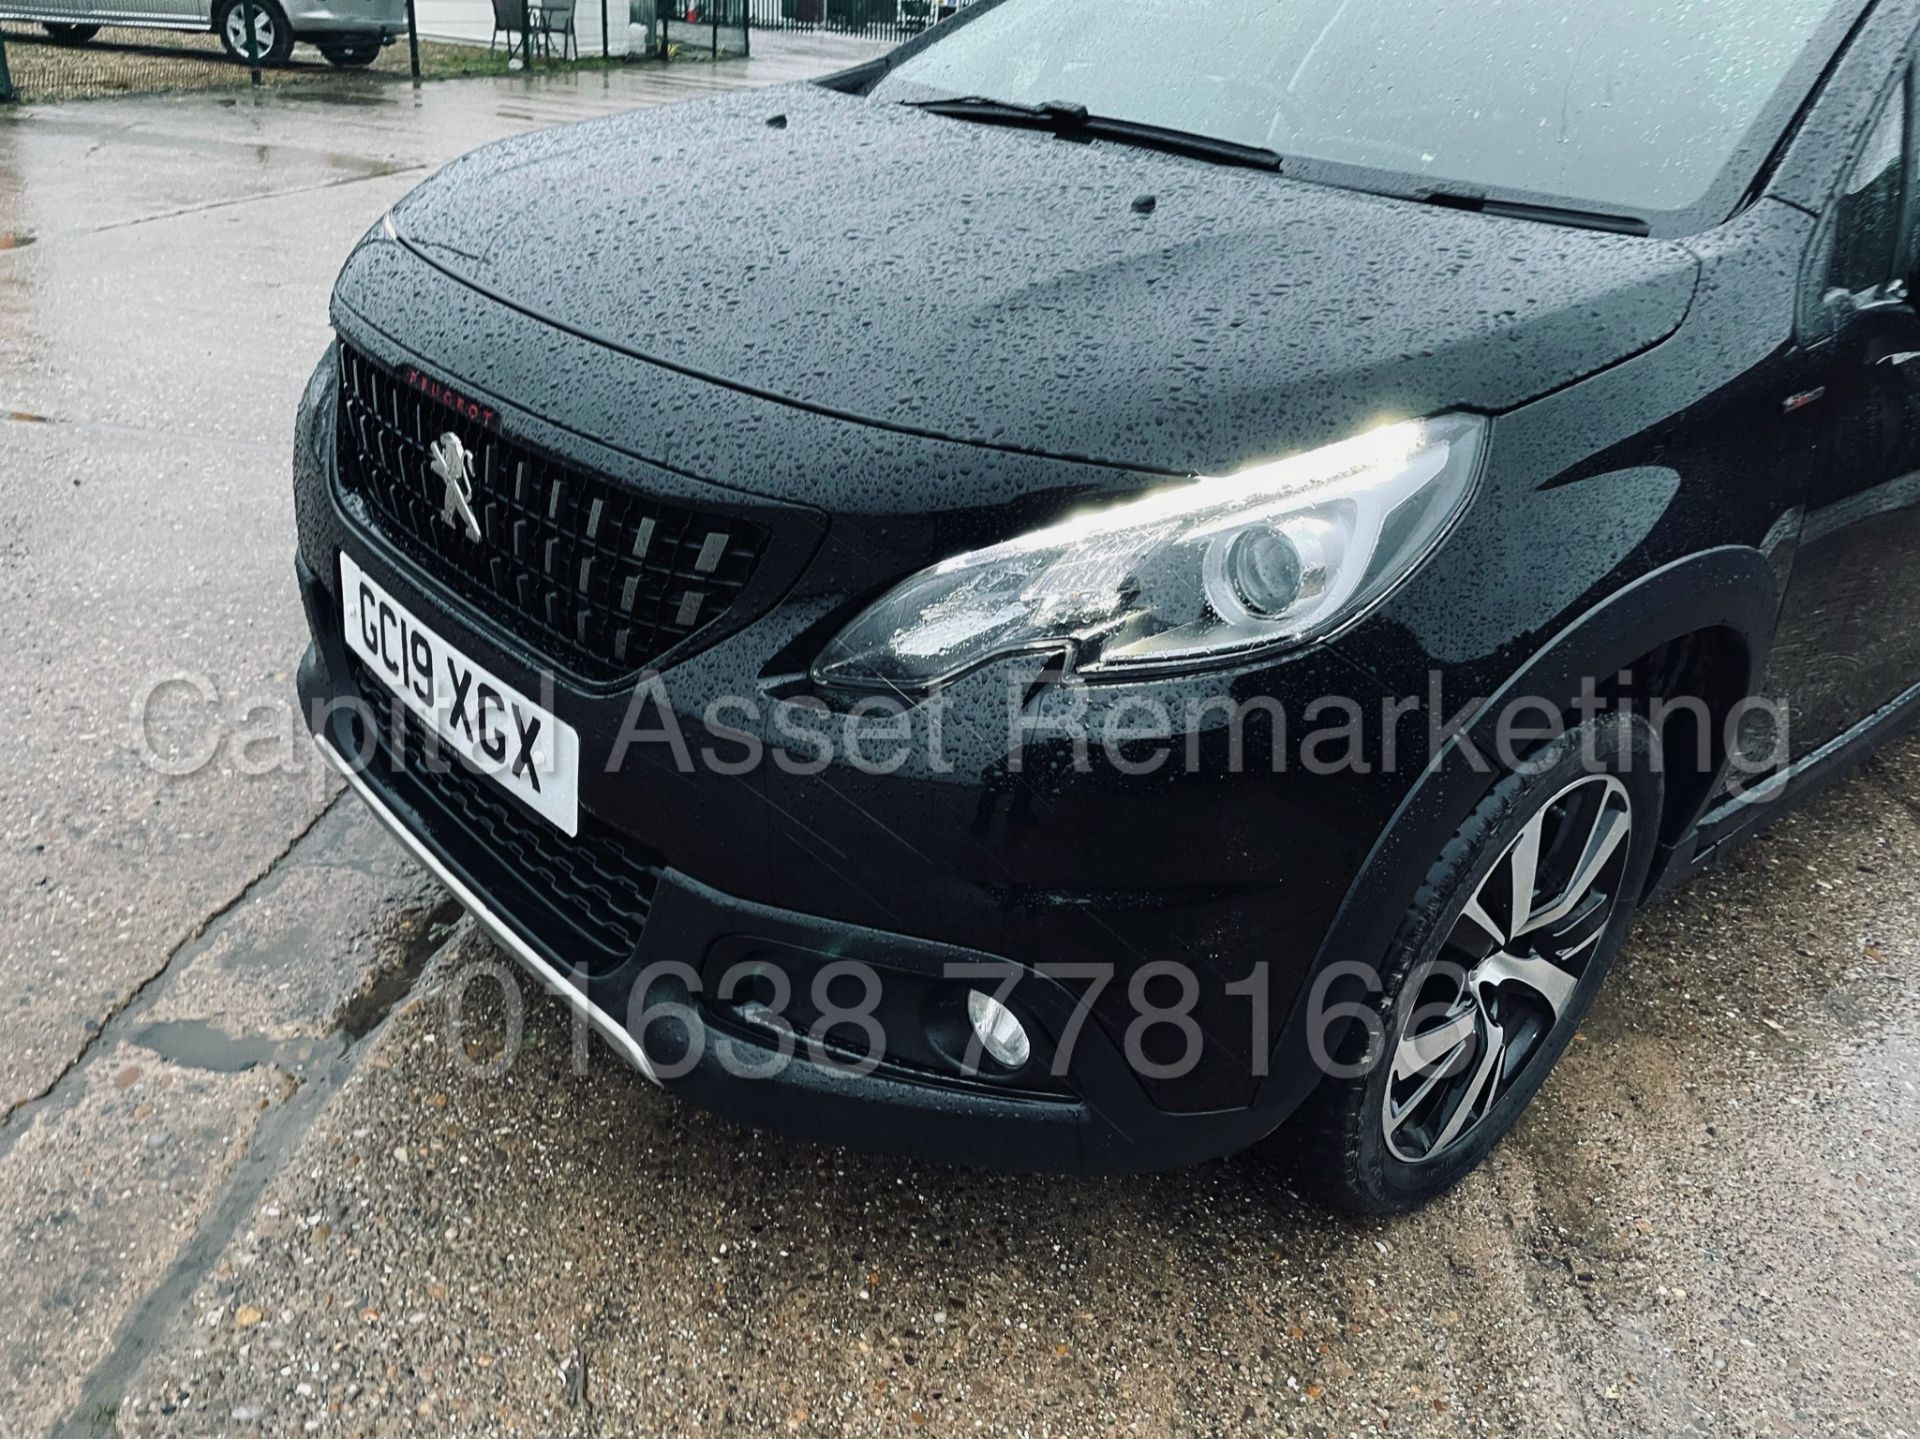 PEUGEOT 2008 *GT LINE* SUV / MPV (2019 - EURO 6) '1.5 BLUE HDI' *SAT NAV - PAN ROOF' *LOW MILES* - Image 16 of 46